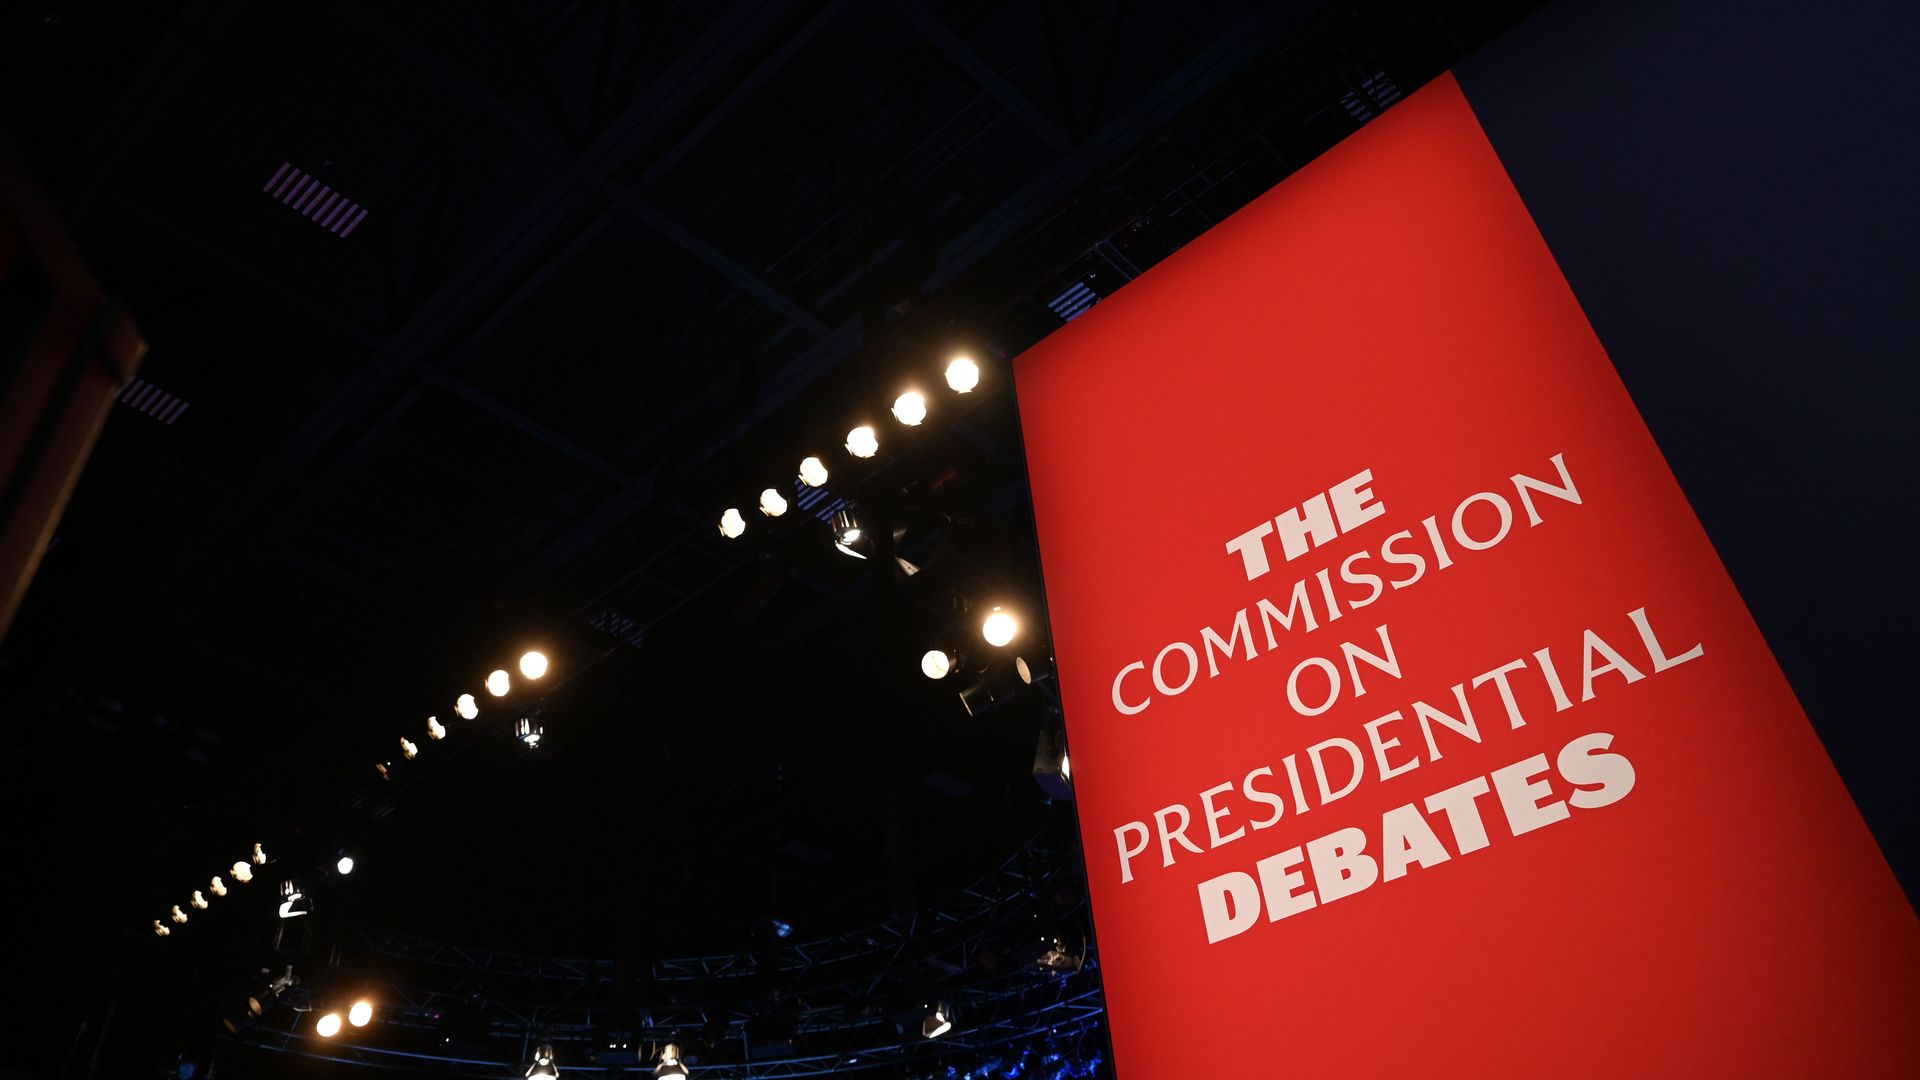 The Commission on Presidential Debates banner is seen as the stage for the final presidential debate.